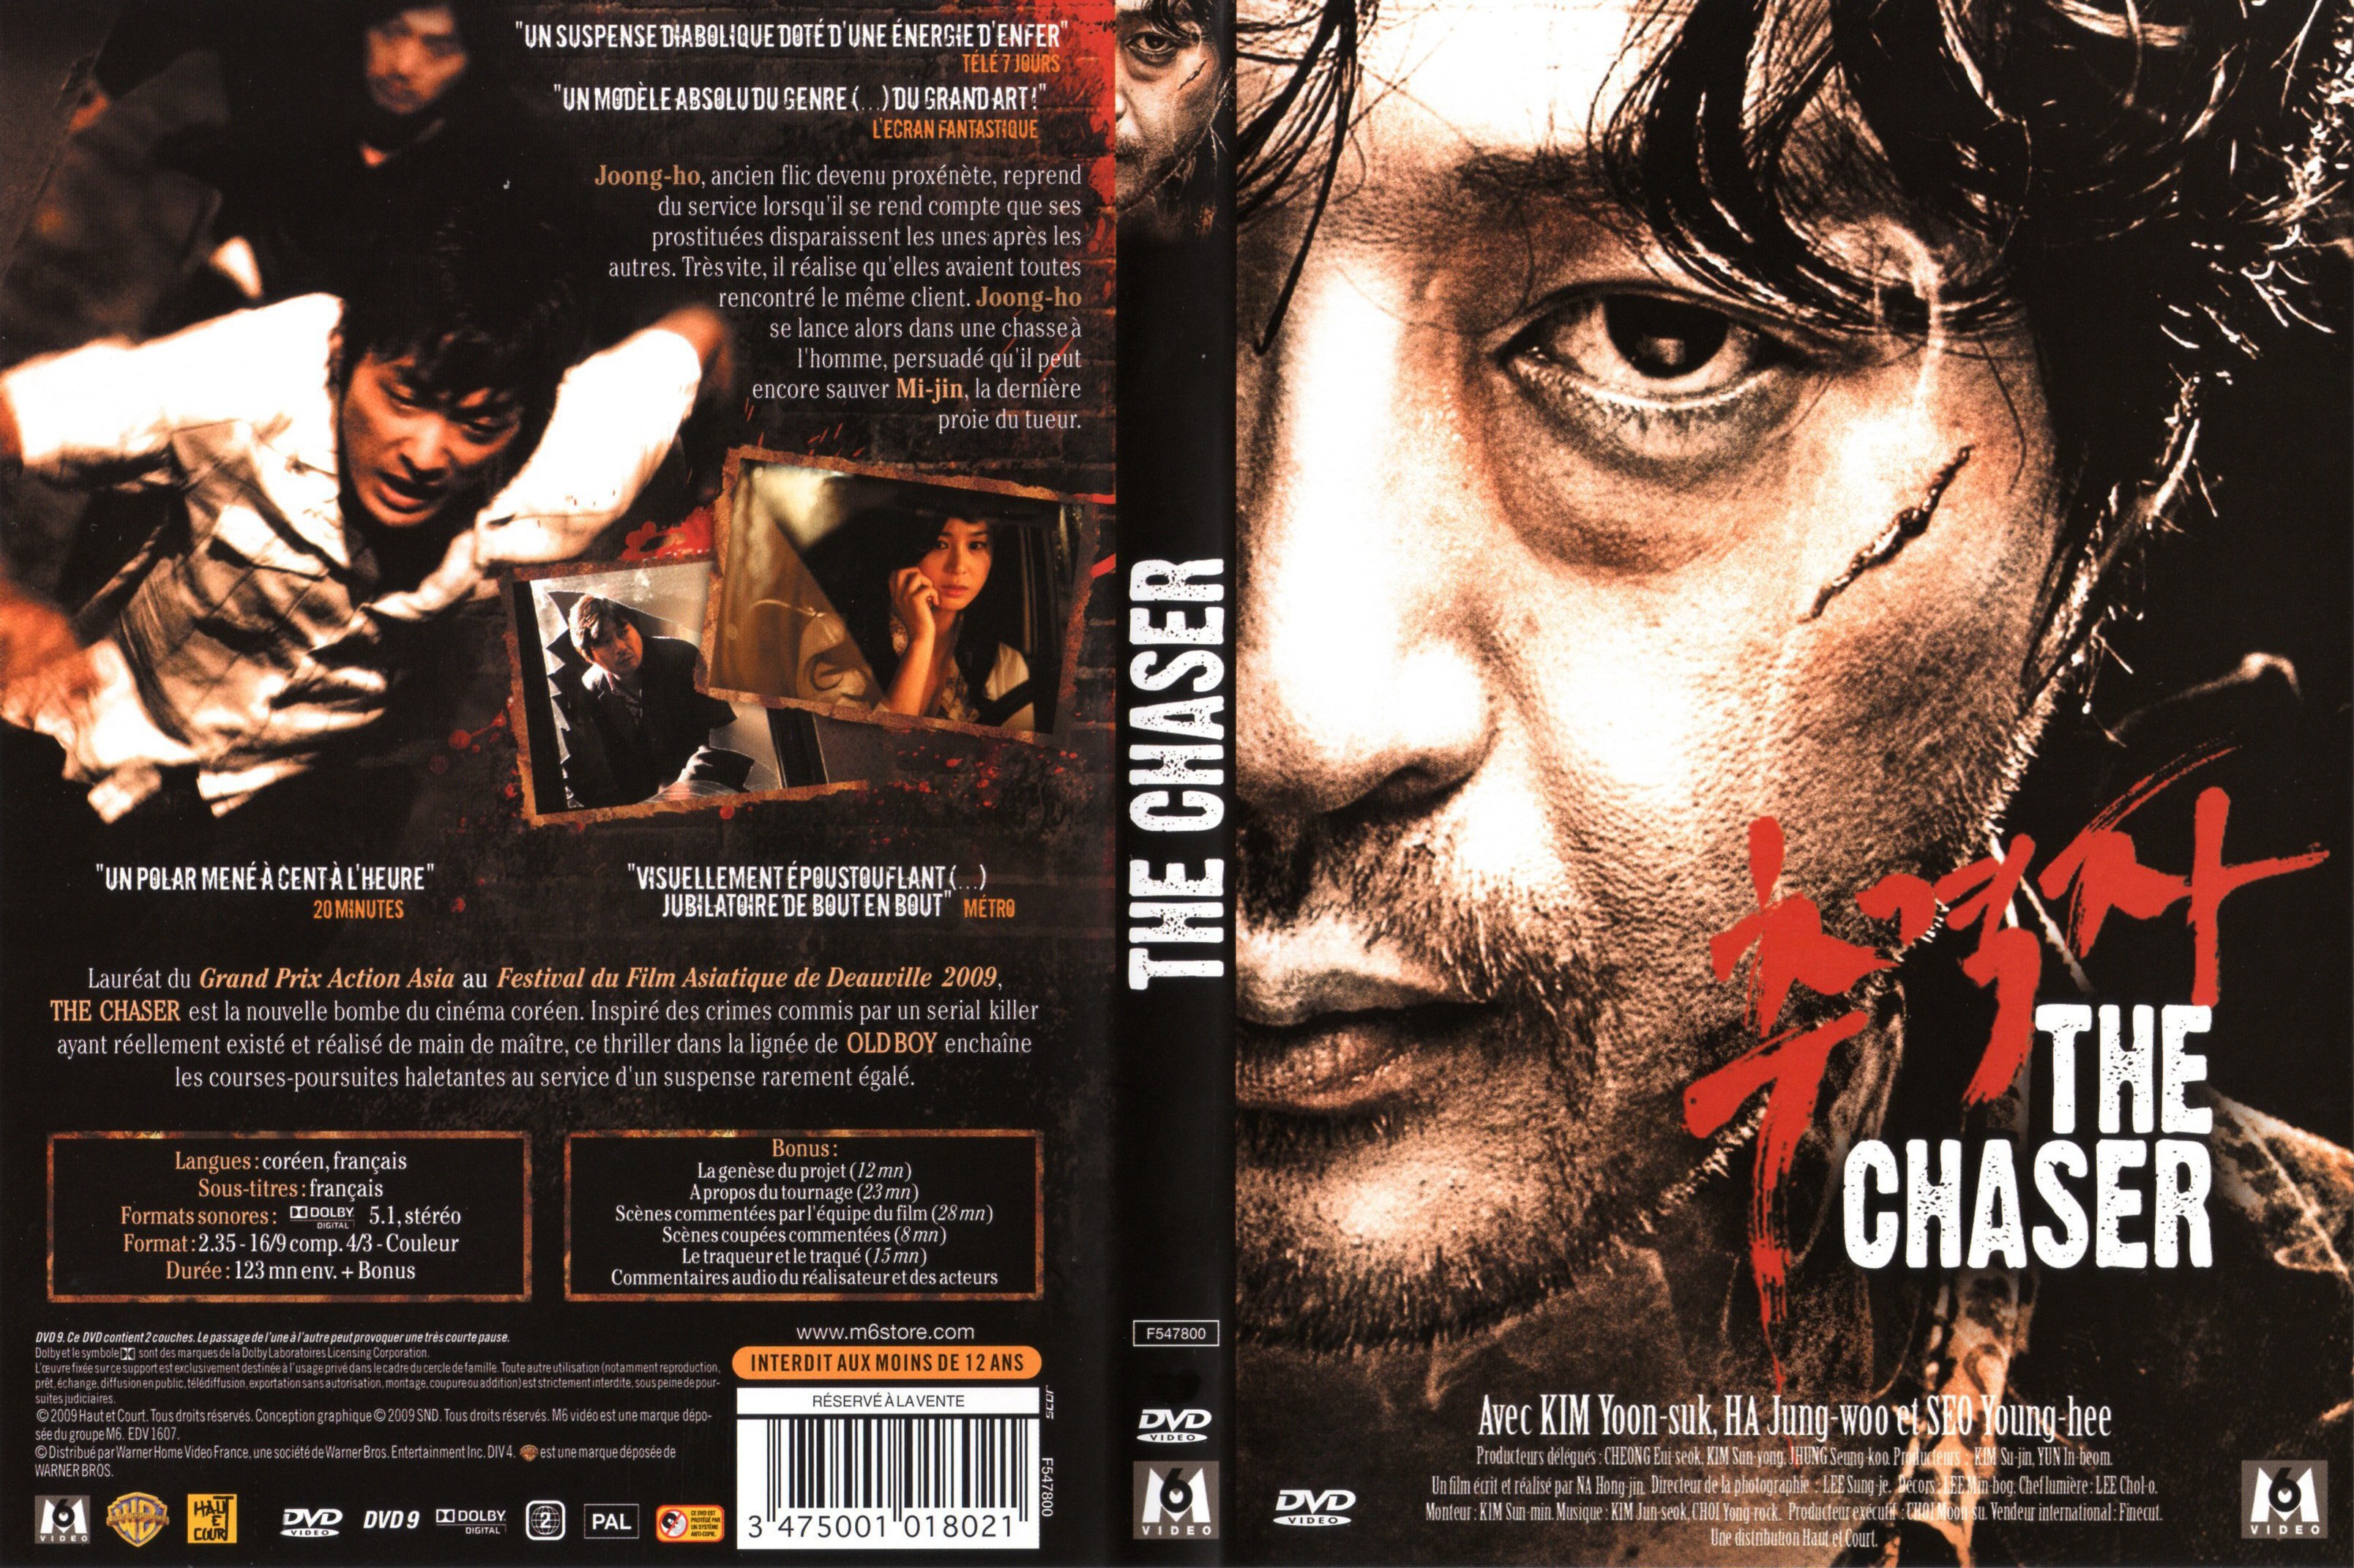 Jaquette DVD The chaser